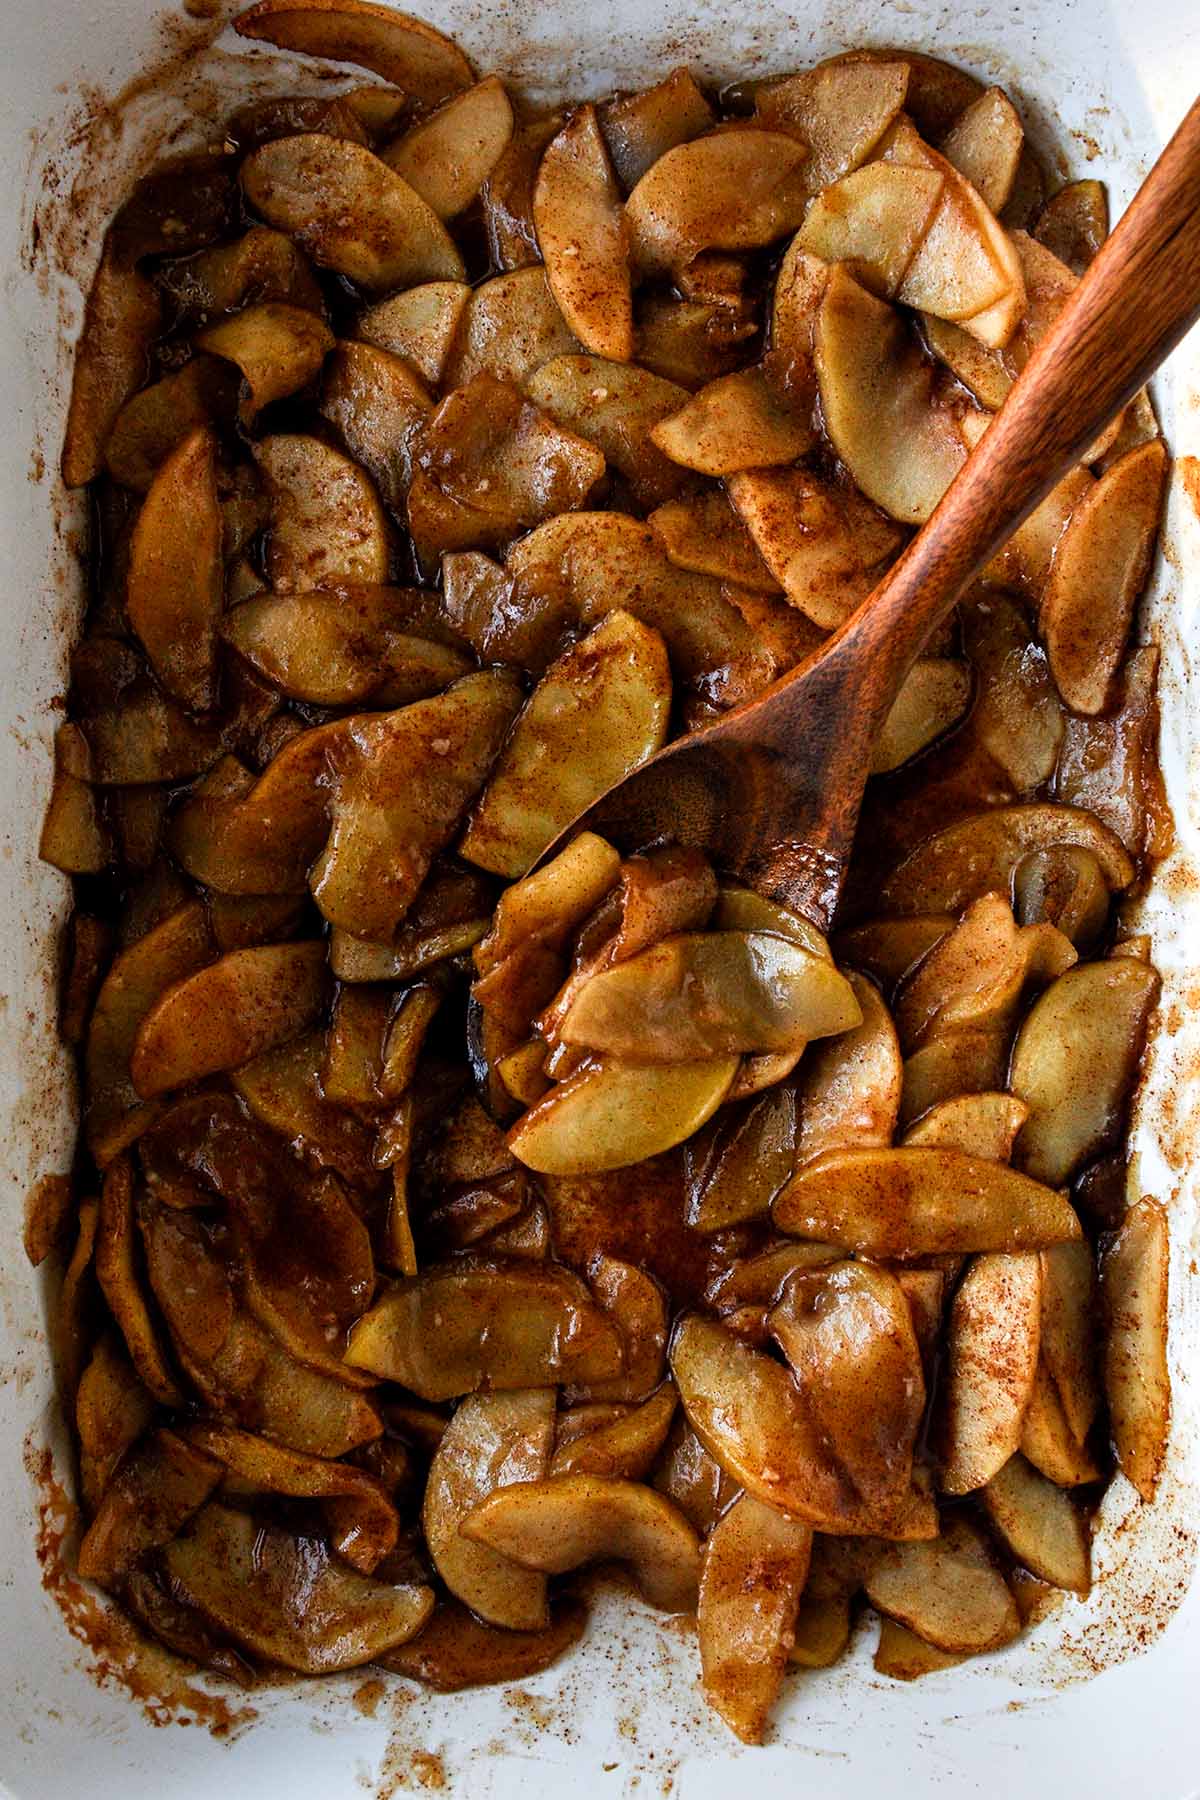 Baking pan filled with cooked cinnamon apples.